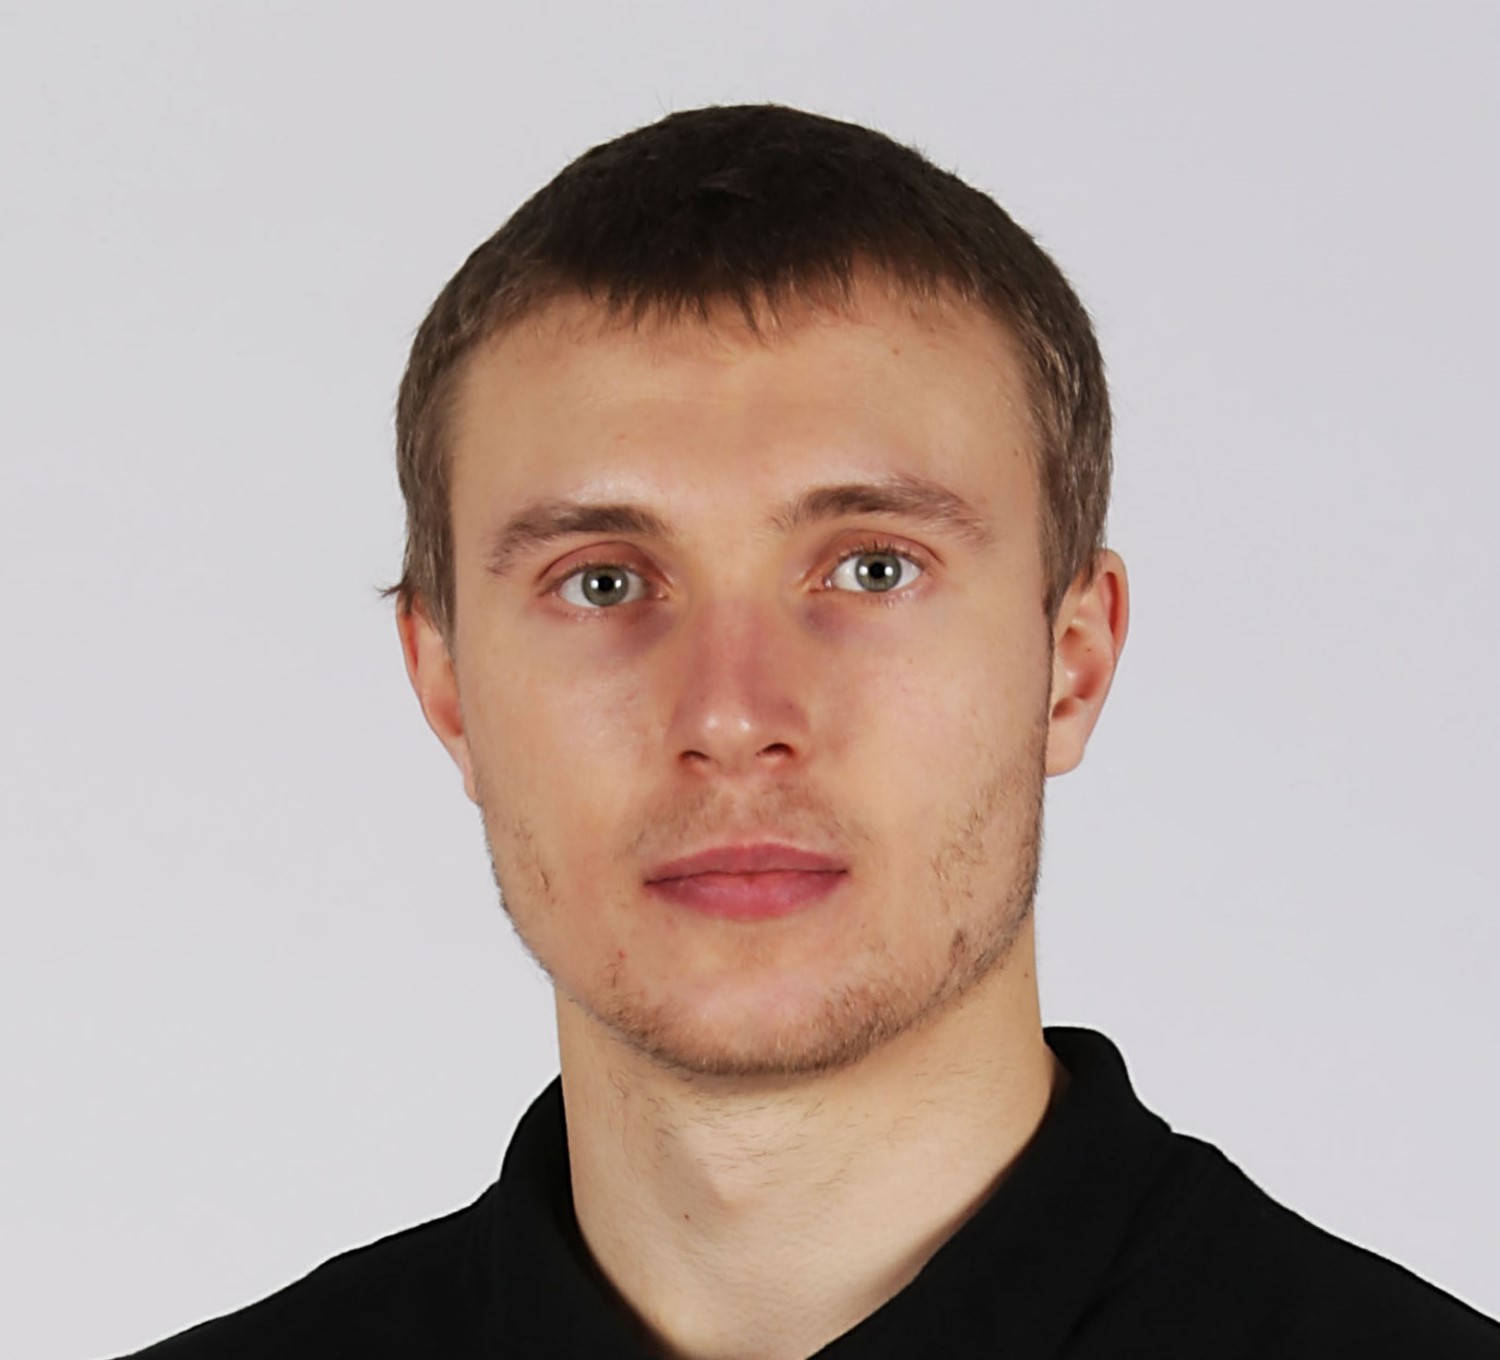 Sirotkin not giving up on F1. He must think he can bring an even bigger check next year